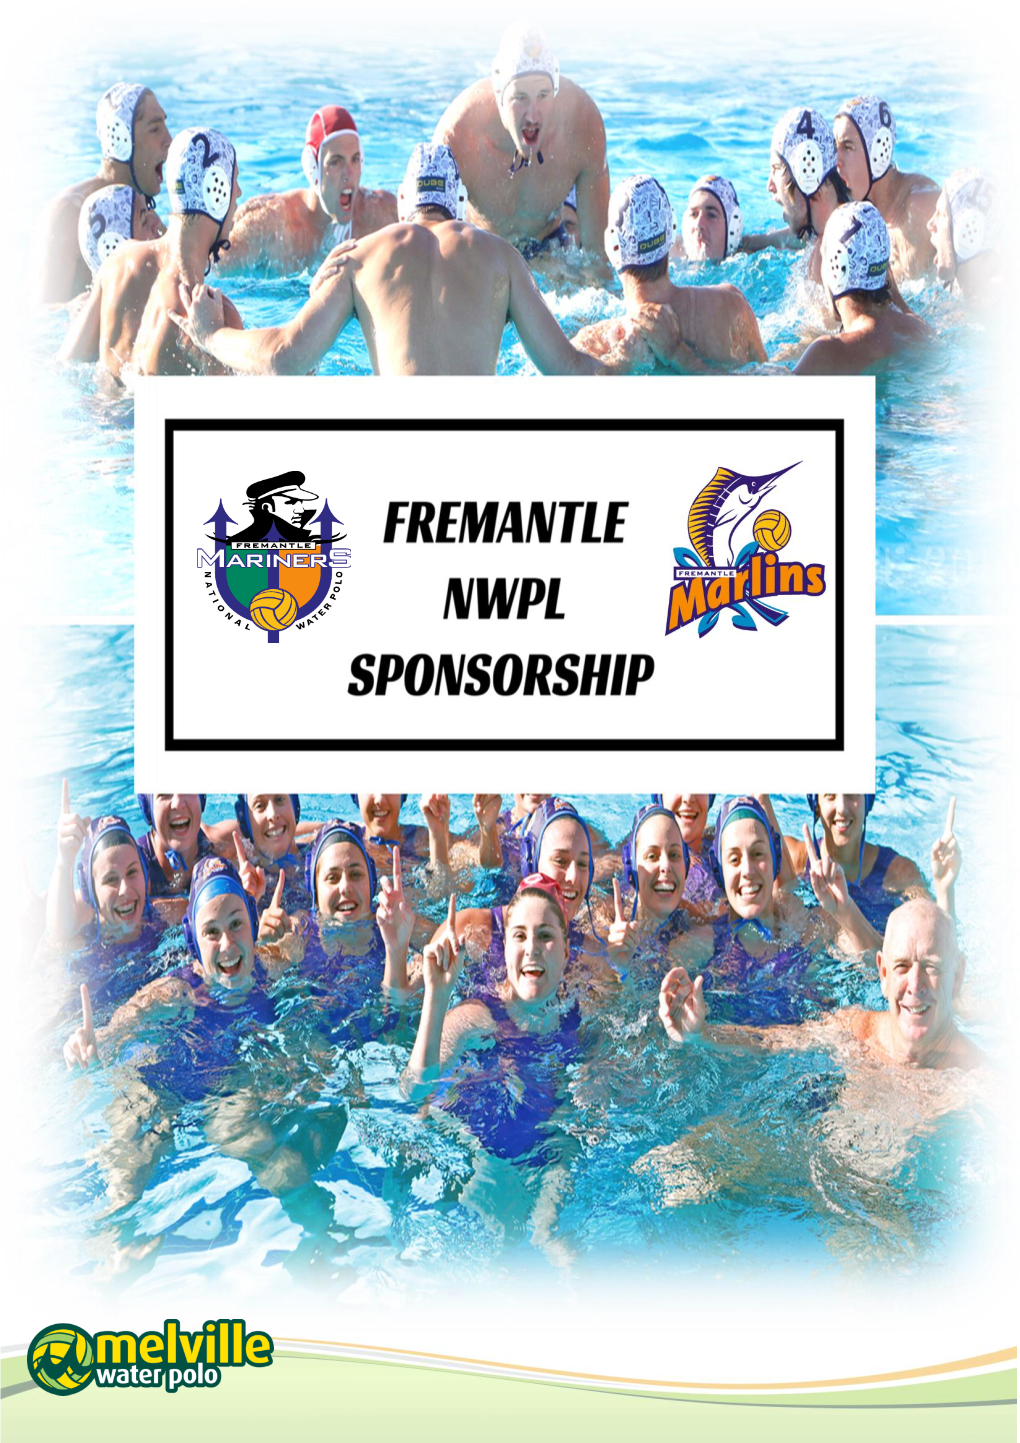 2017 National Water Polo League